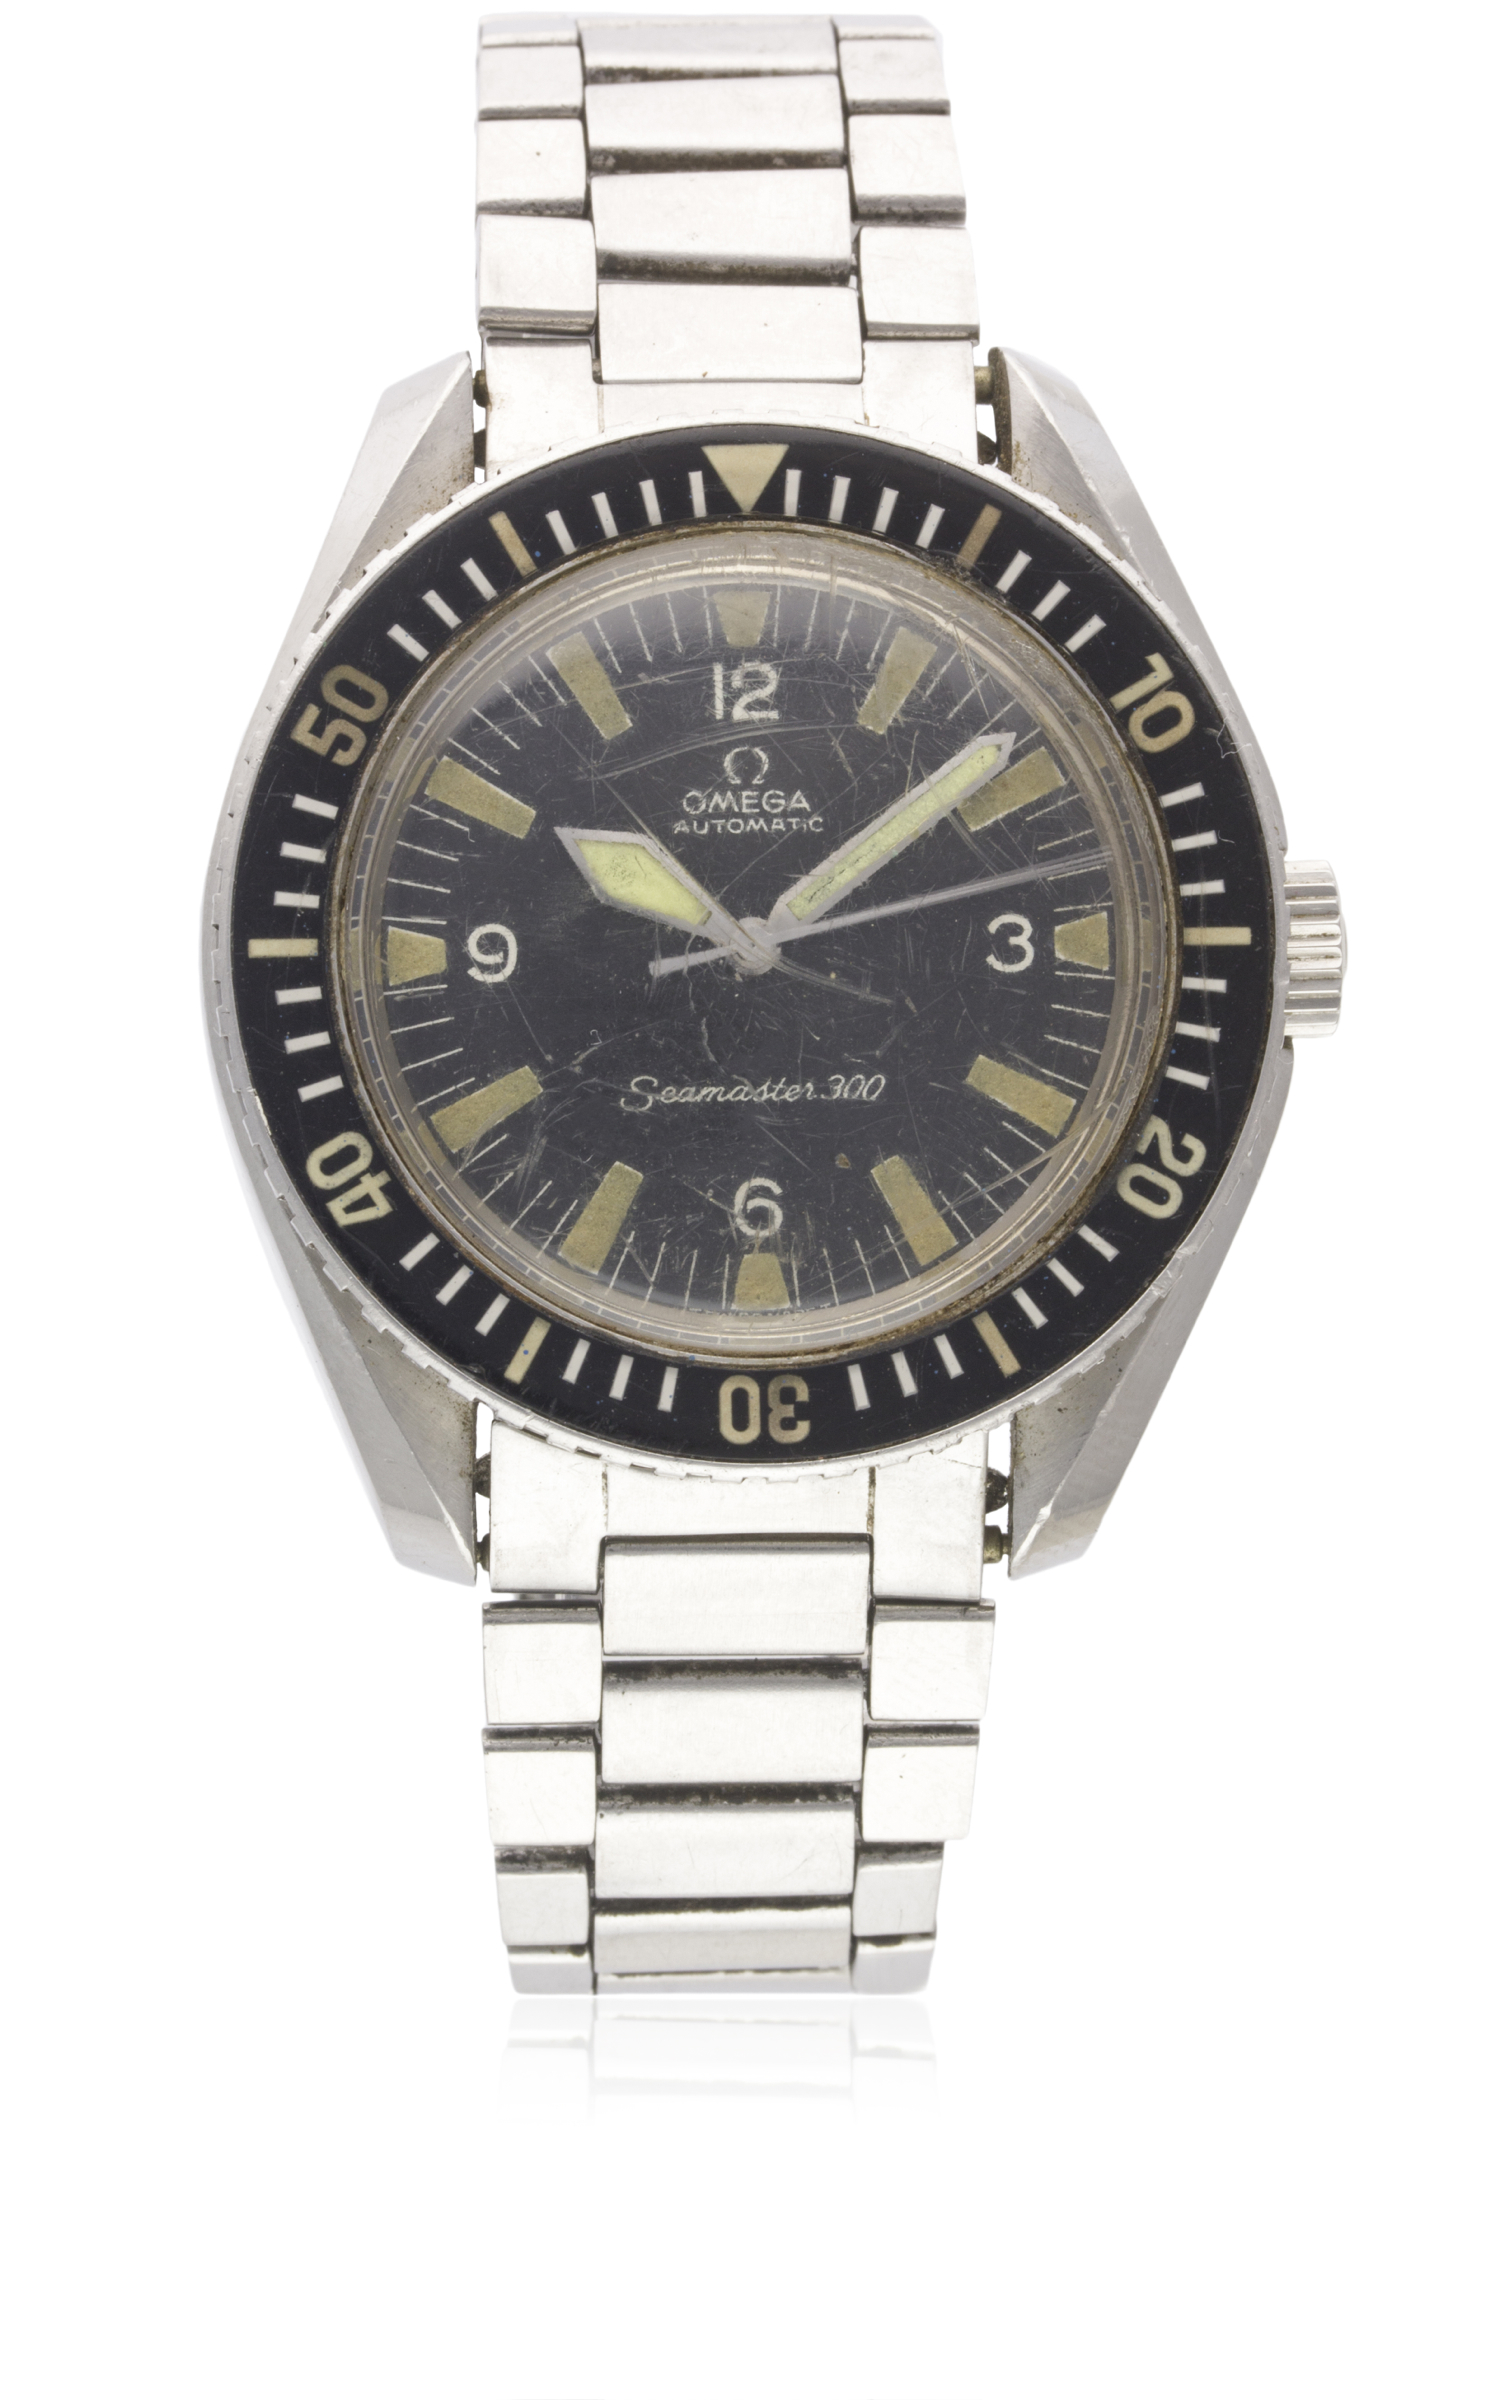 A RARE GENTLEMAN'S STAINLESS STEEL OMEGA SEAMASTER 300 BRACELET WATCH CIRCA 1967, REF. 165024 - Image 2 of 8